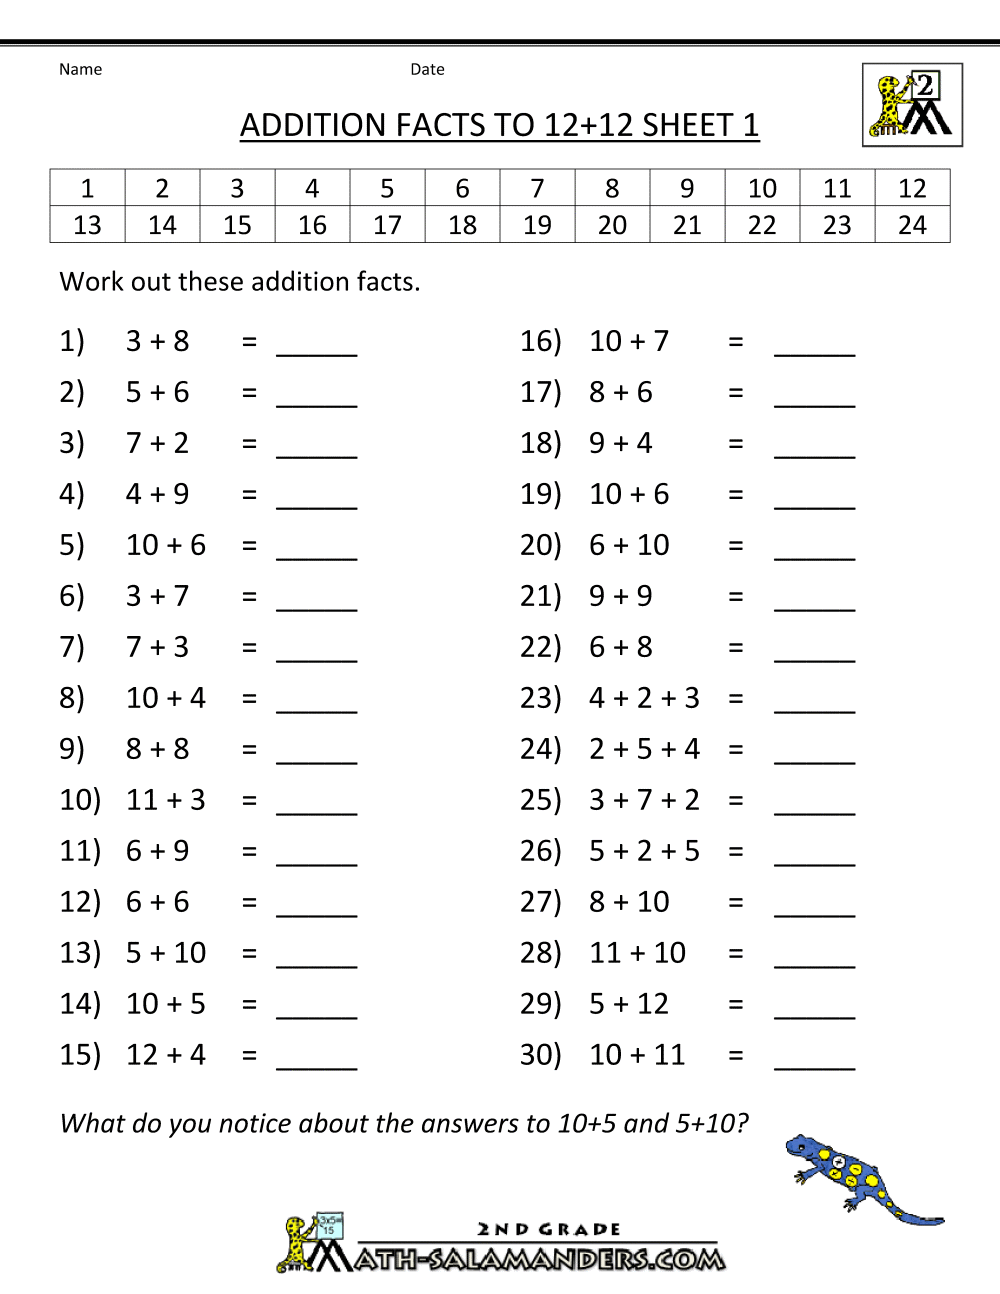 Learning Addition Facts To 12+12